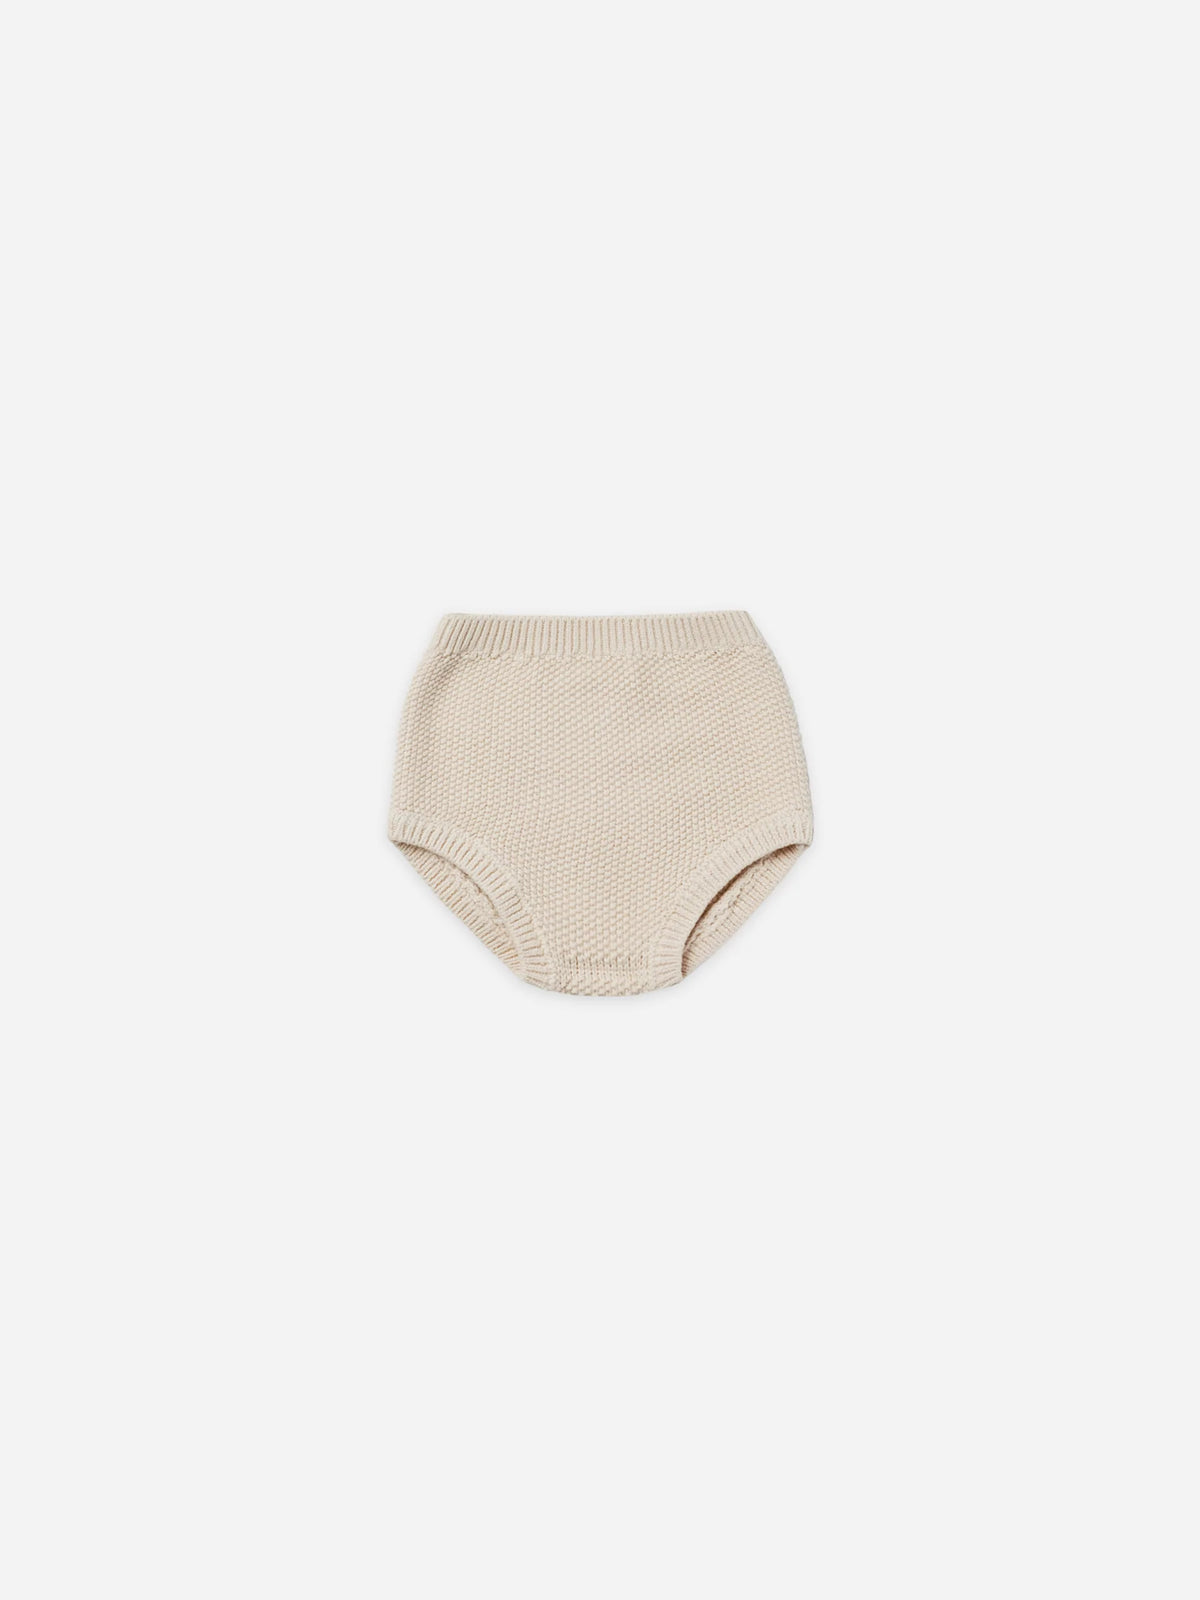 Quincy Mae Knit Bloomer